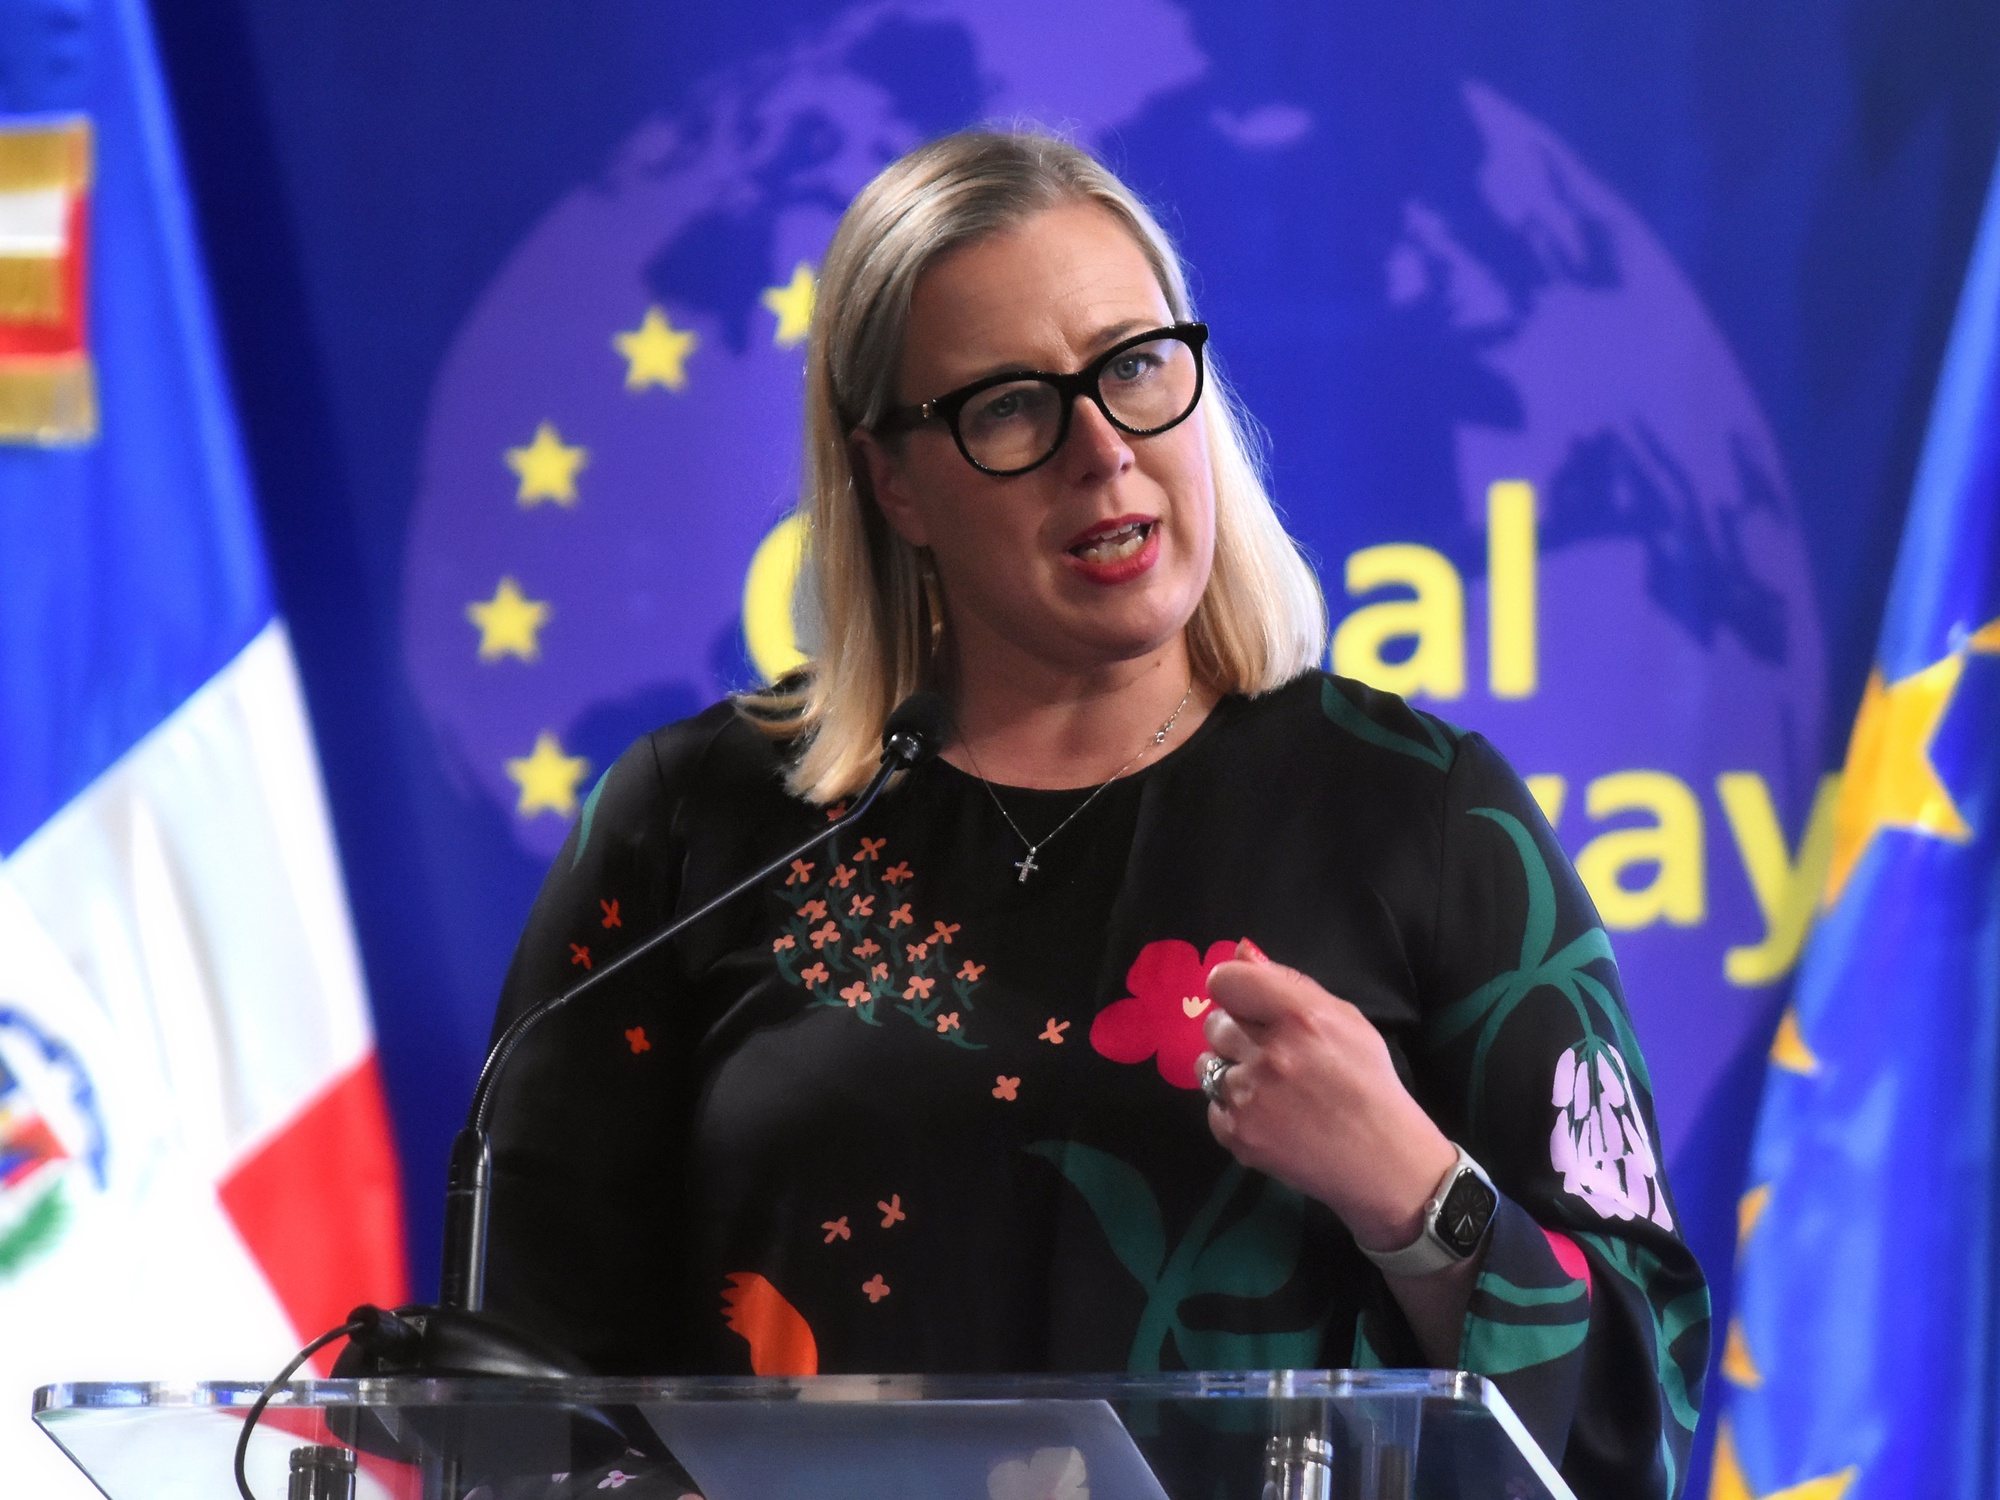 epa11378530 The European Commissioner for International Associations, Jutta Urpilainen, speaks during a signing event for an agreement to promote the green and inclusive economy in the Dominican Republic in Santo Domingo, Dominican Republic, 29 May 2024. The European Union (EU) and the Dominican Republic signed an agreement in Santo Domingo to promote a green and inclusive economy in the Caribbean, which involves 13 million euros (14.05 million US dollars). This commitment was signed by the European Commissioner for International Associations, Jutta Urpilainen, and the Dominican Minister of Economy, Planning and Development, Pavel Isa Contreras.  EPA/ORLANDO RAMOS